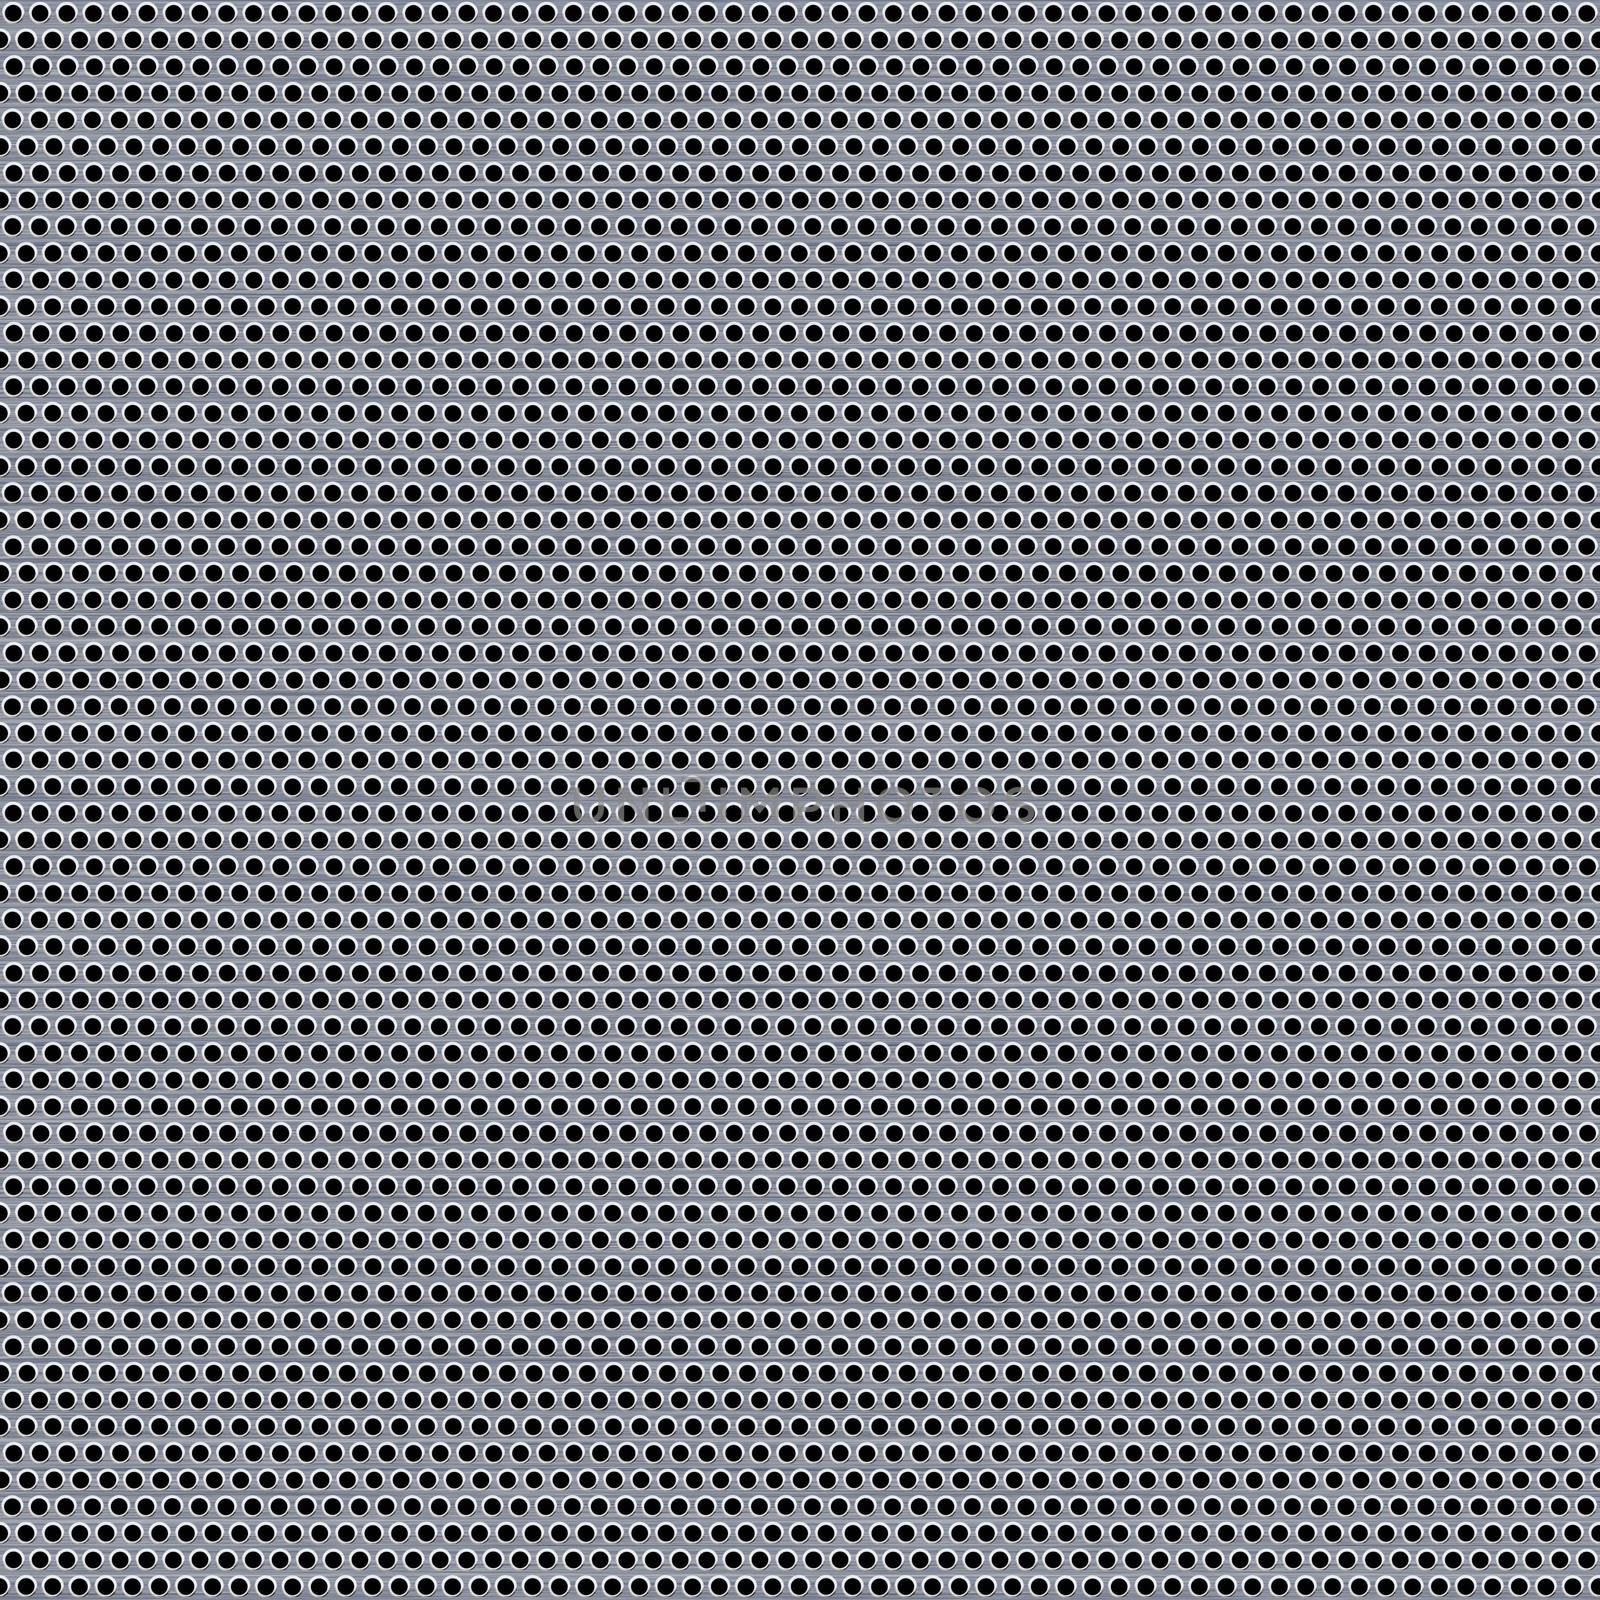 A metal grill texture with circular holes.